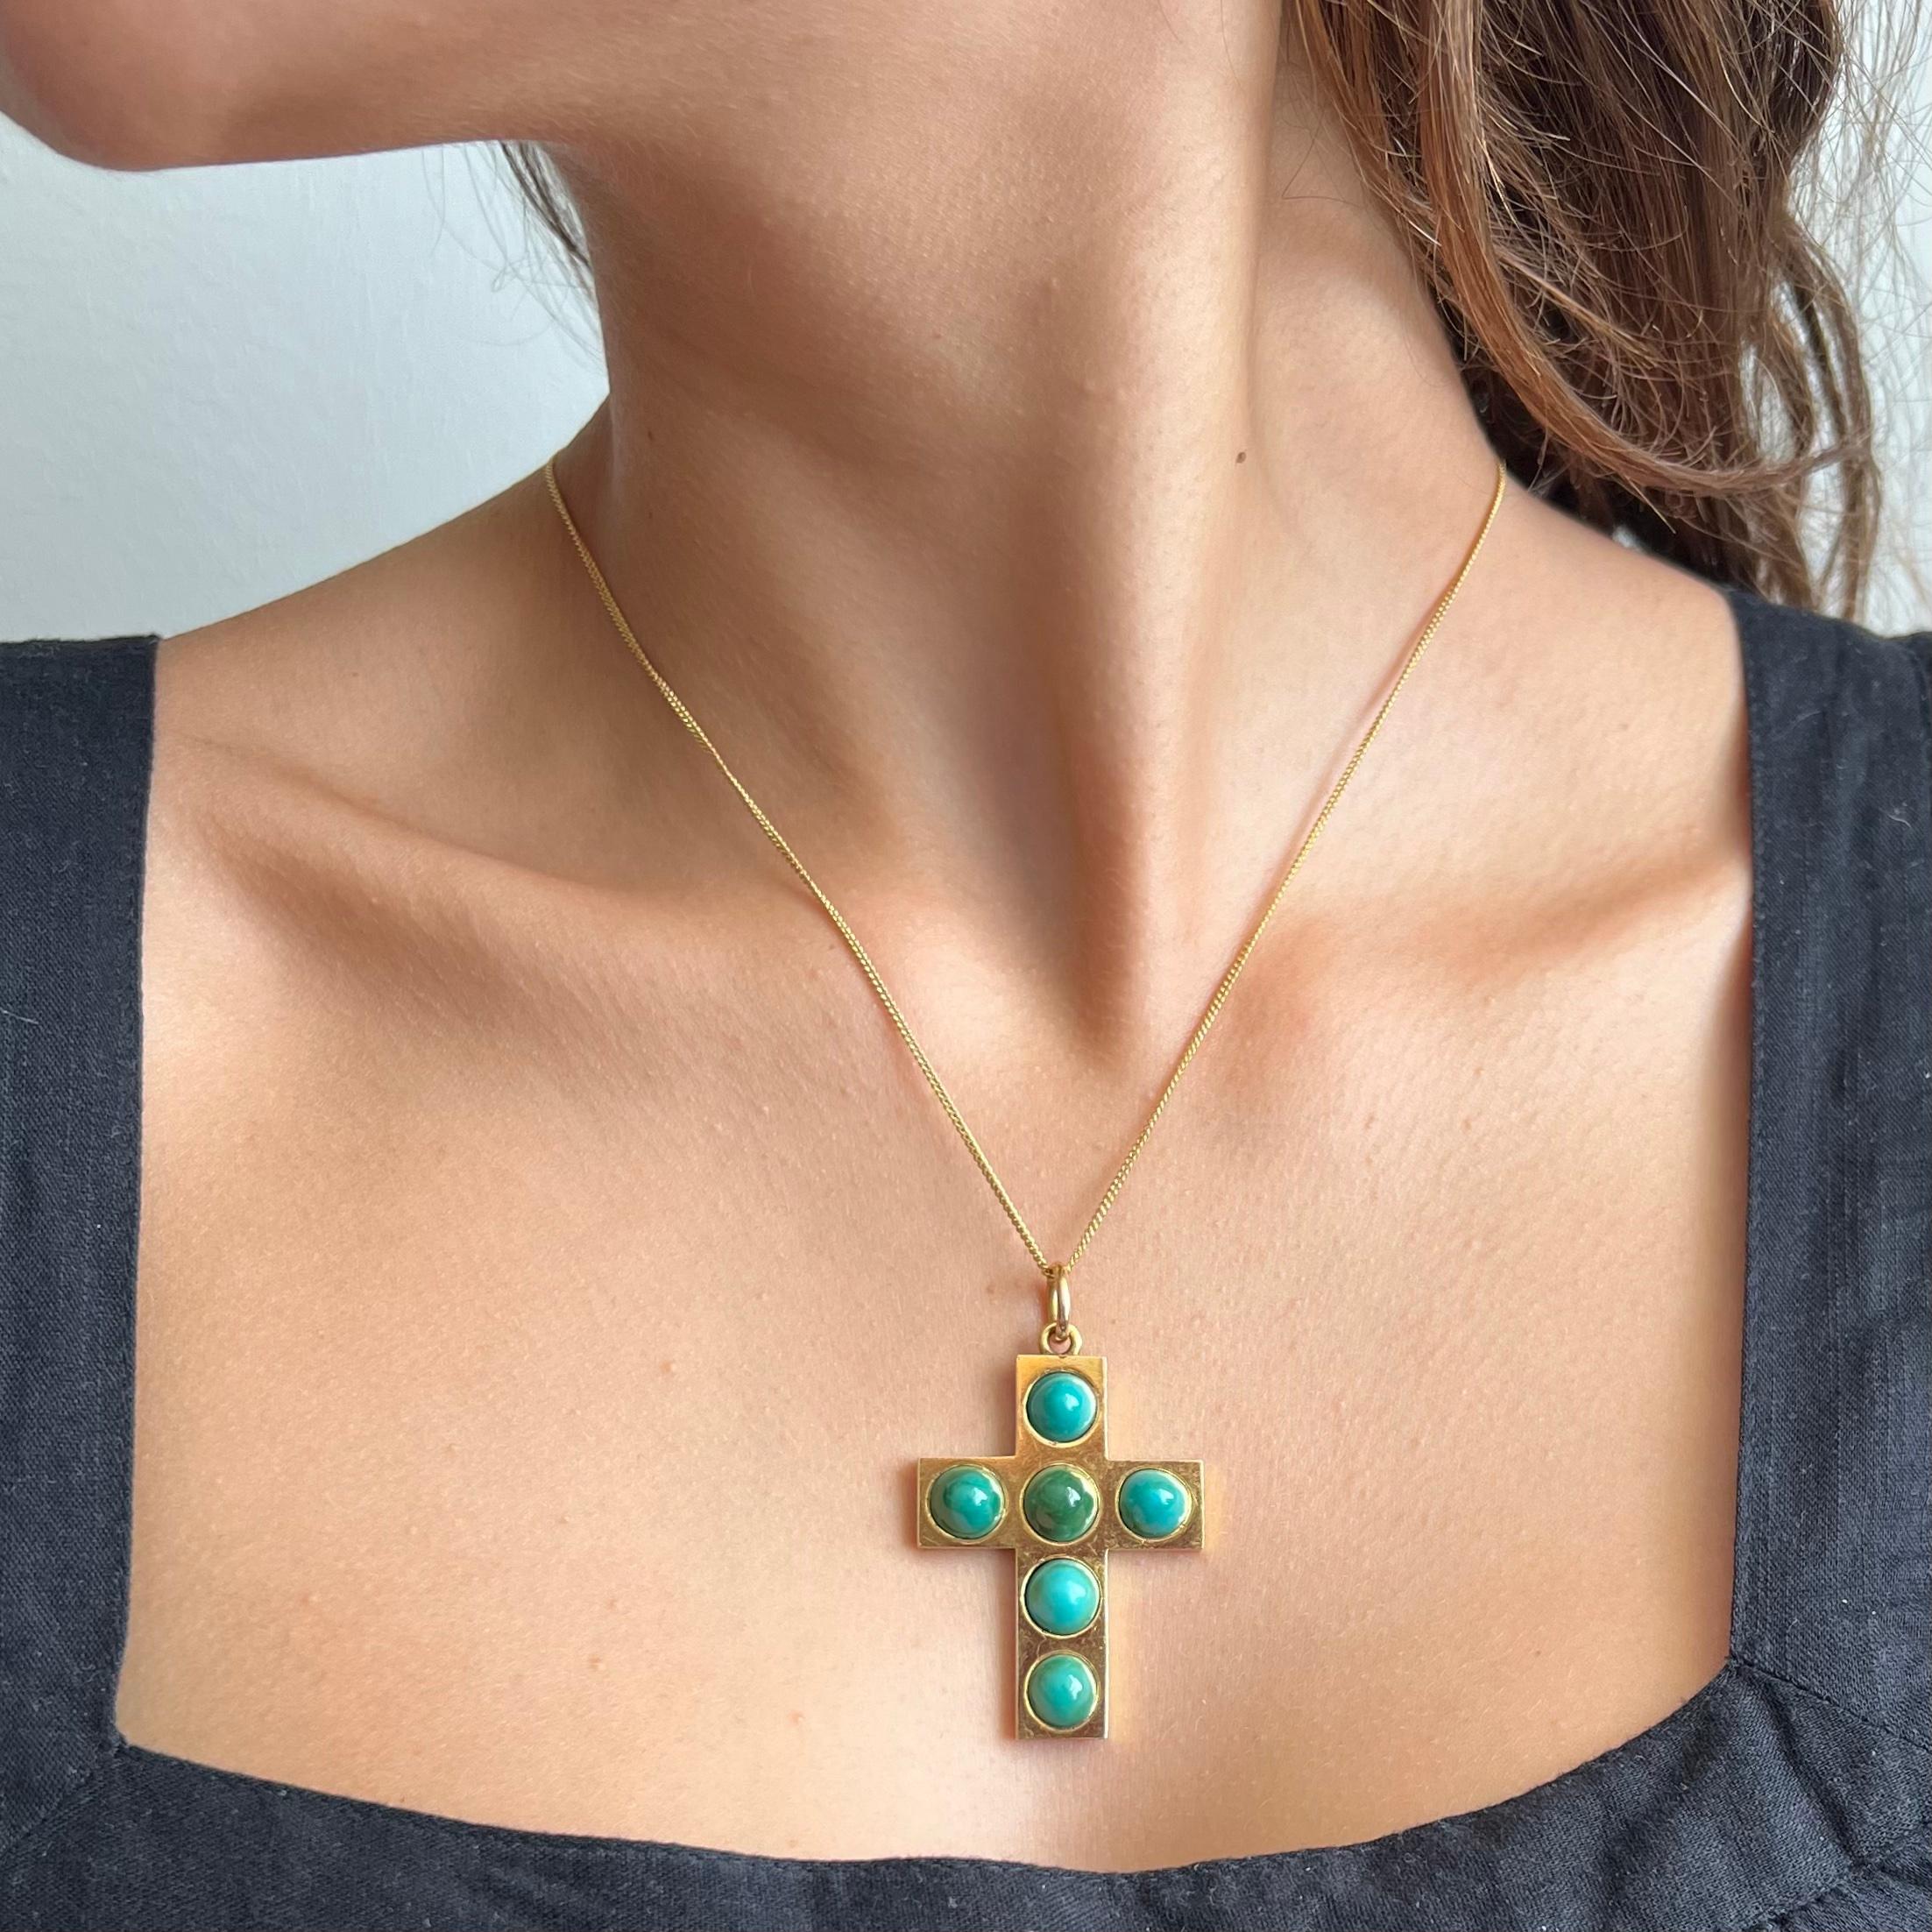 An antique Victorian 14 karat yellow gold cross pendant created with turquoise cabochon stones. This lovely antique cross is beautifully decorated with an array of blue-green turquoise cabochons across the front. The turquoise cabochon stones are